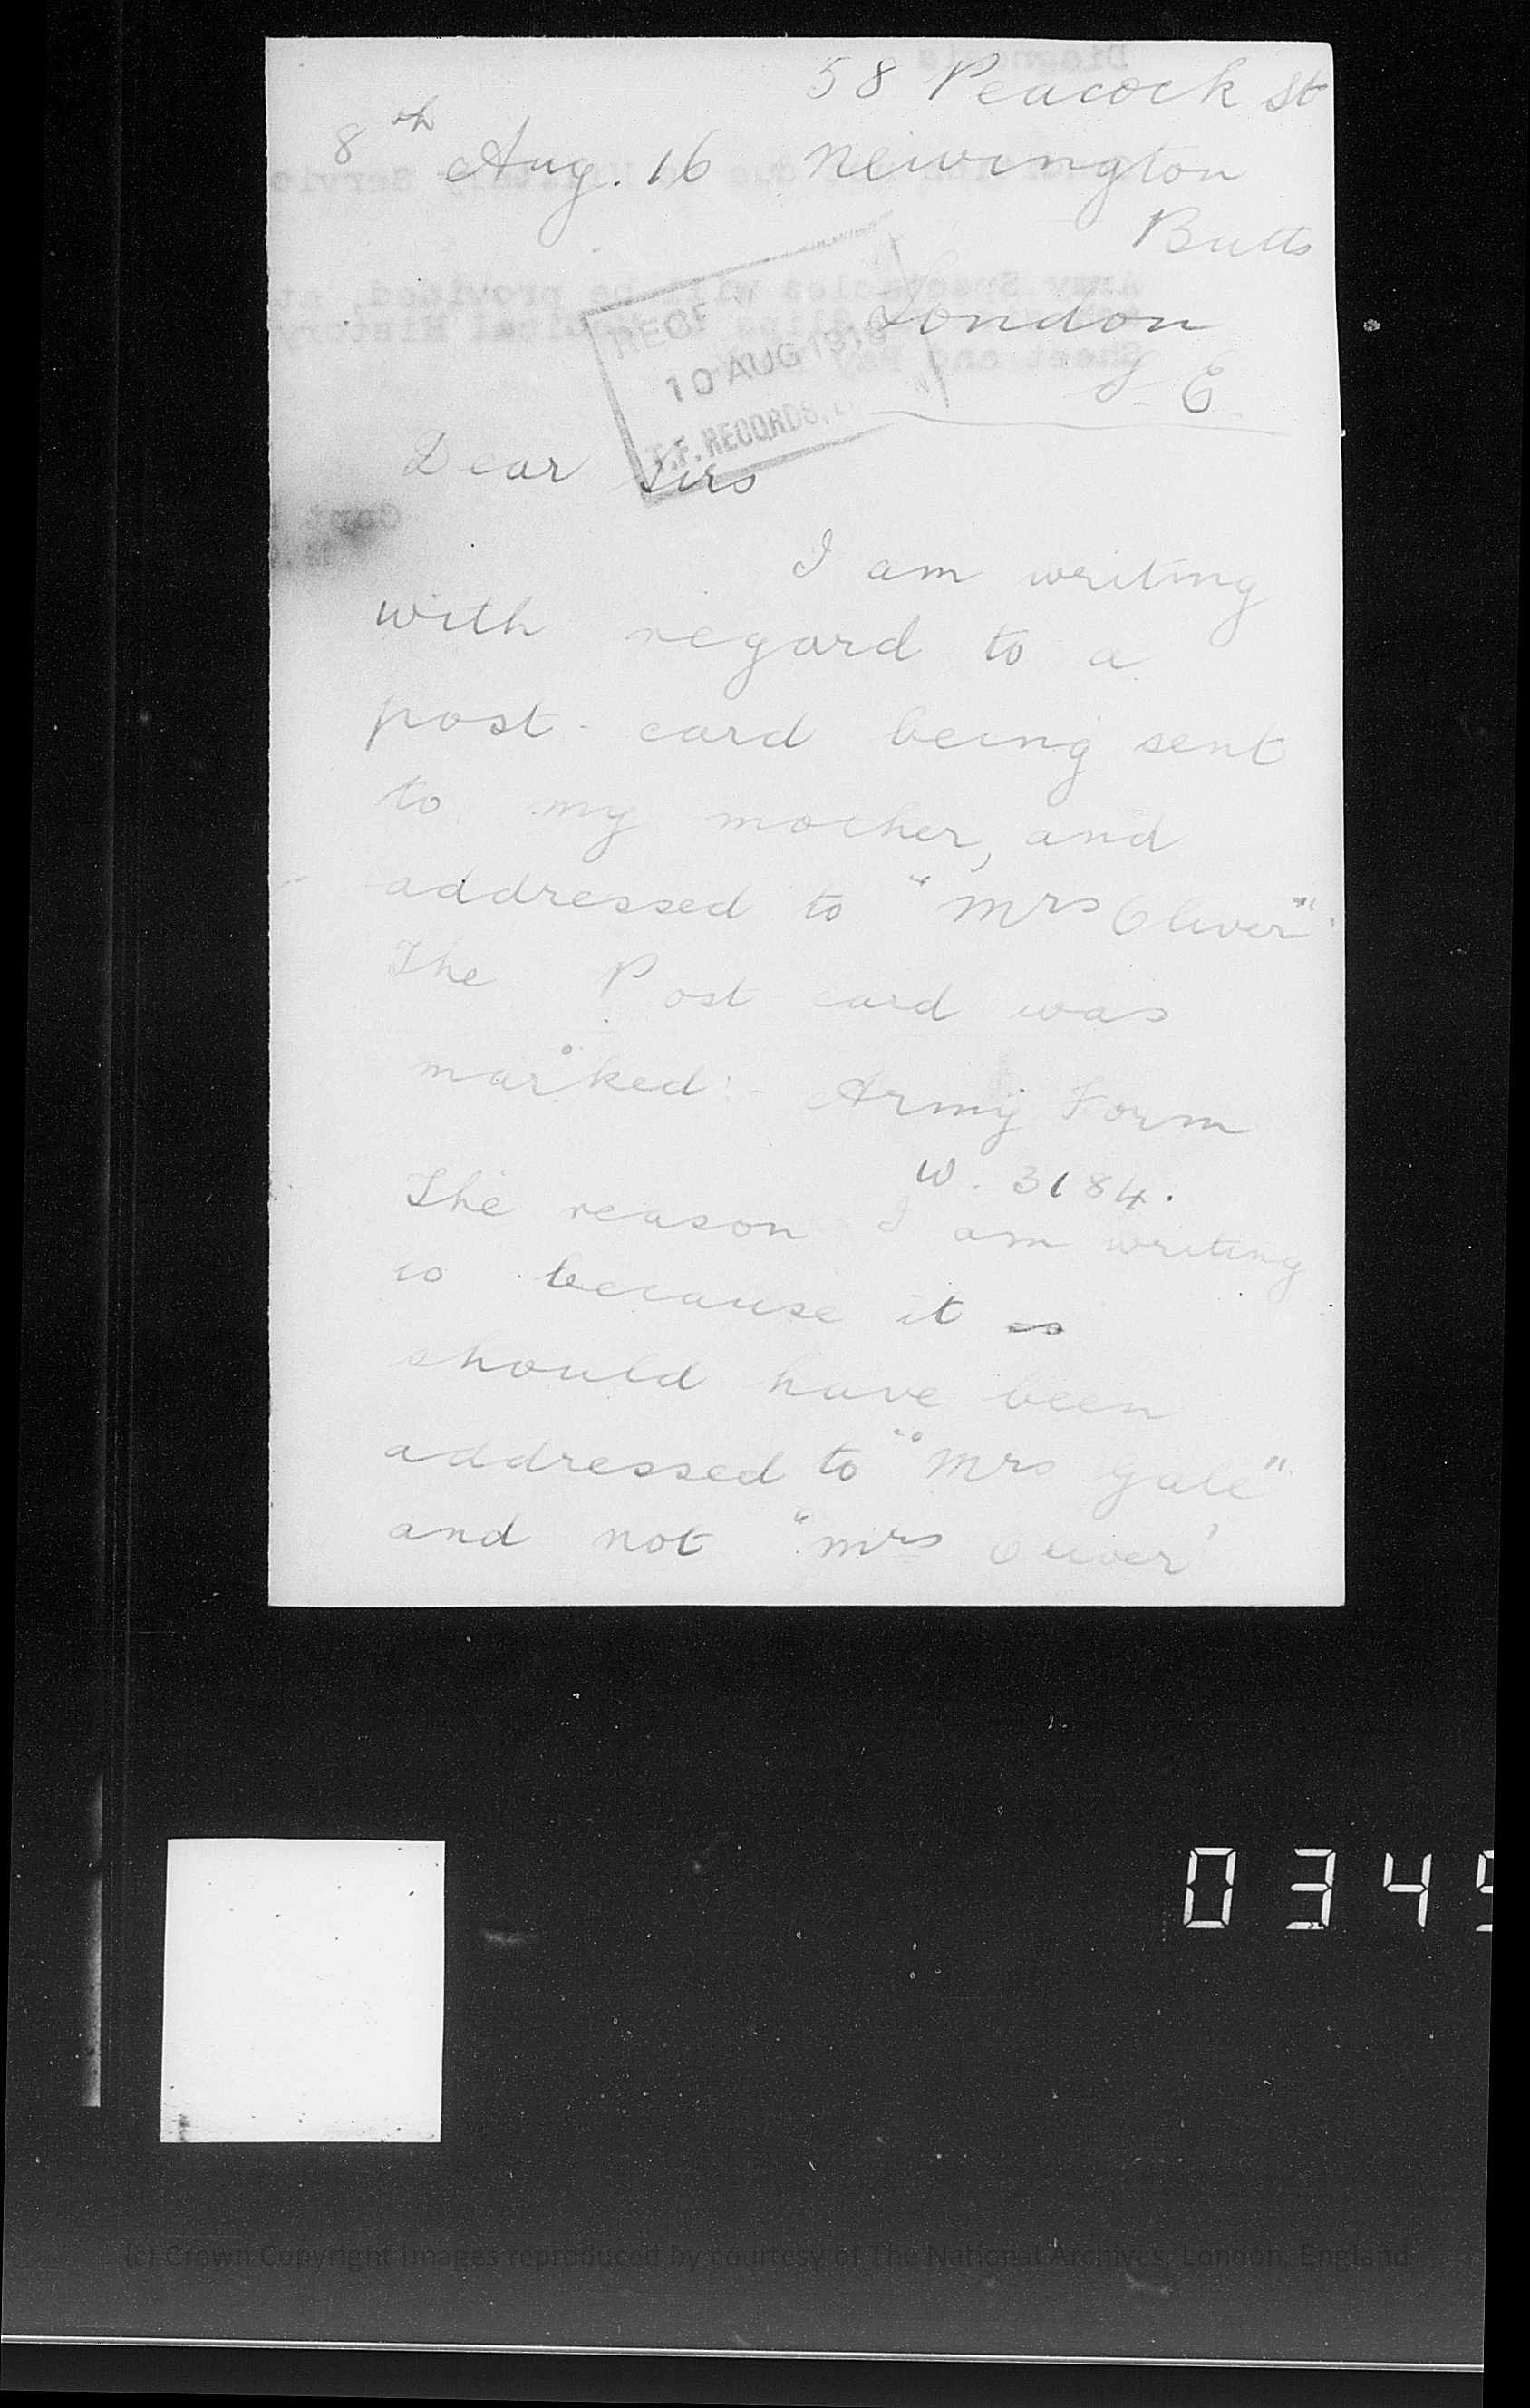 Letter written by Charles to ensure letters were addressed properly to his foster mother